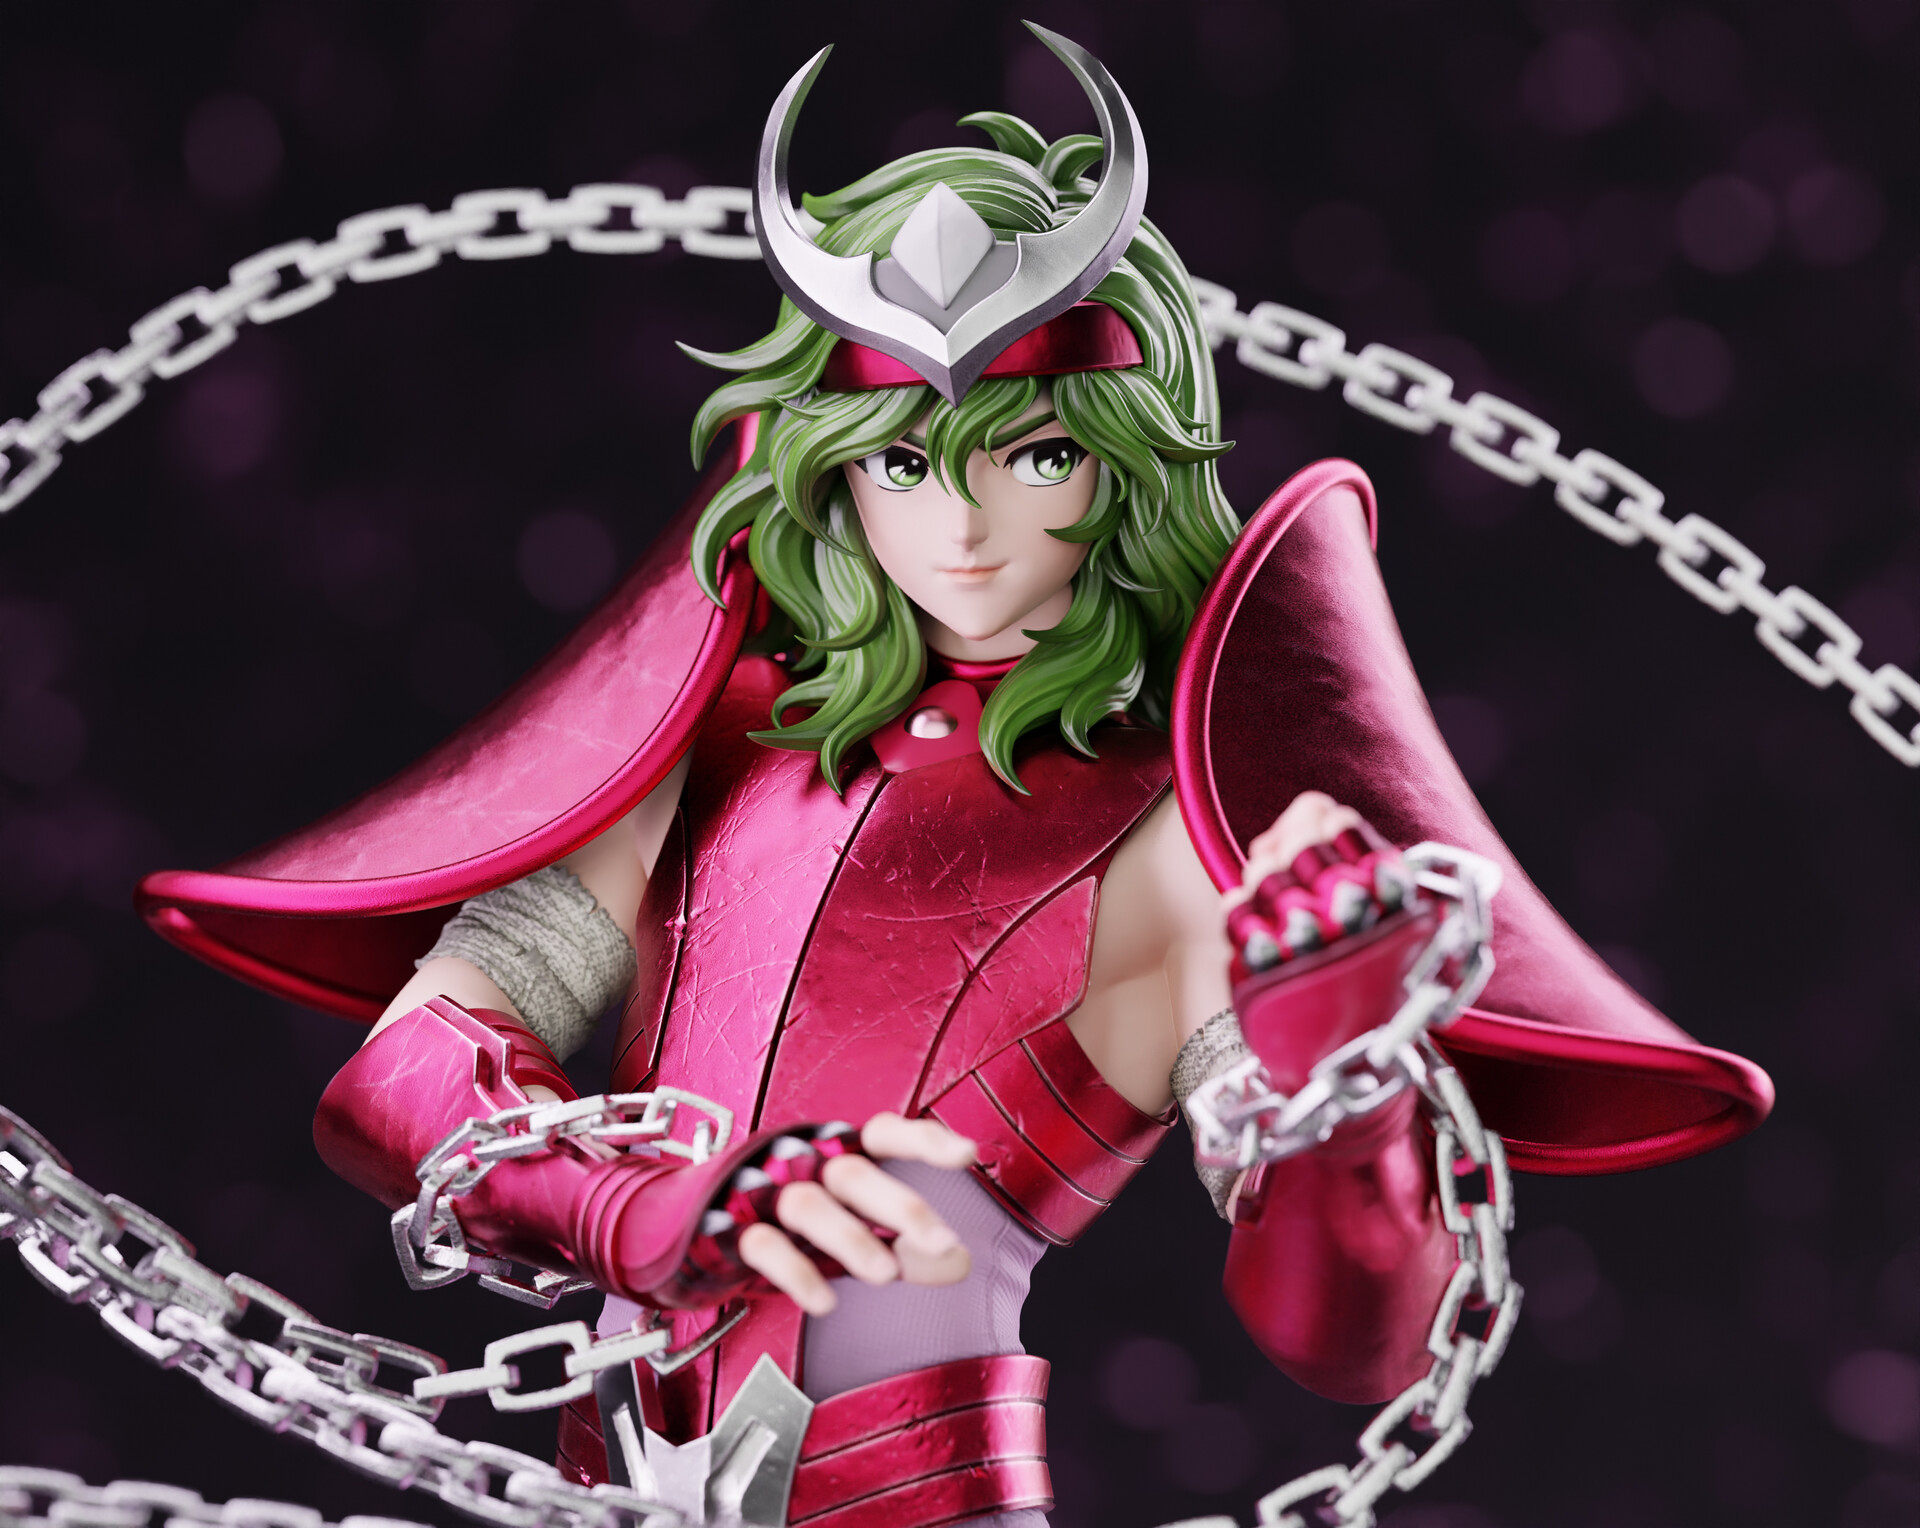 Andromeda Shun on myCast - Fan Casting Your Favorite Stories